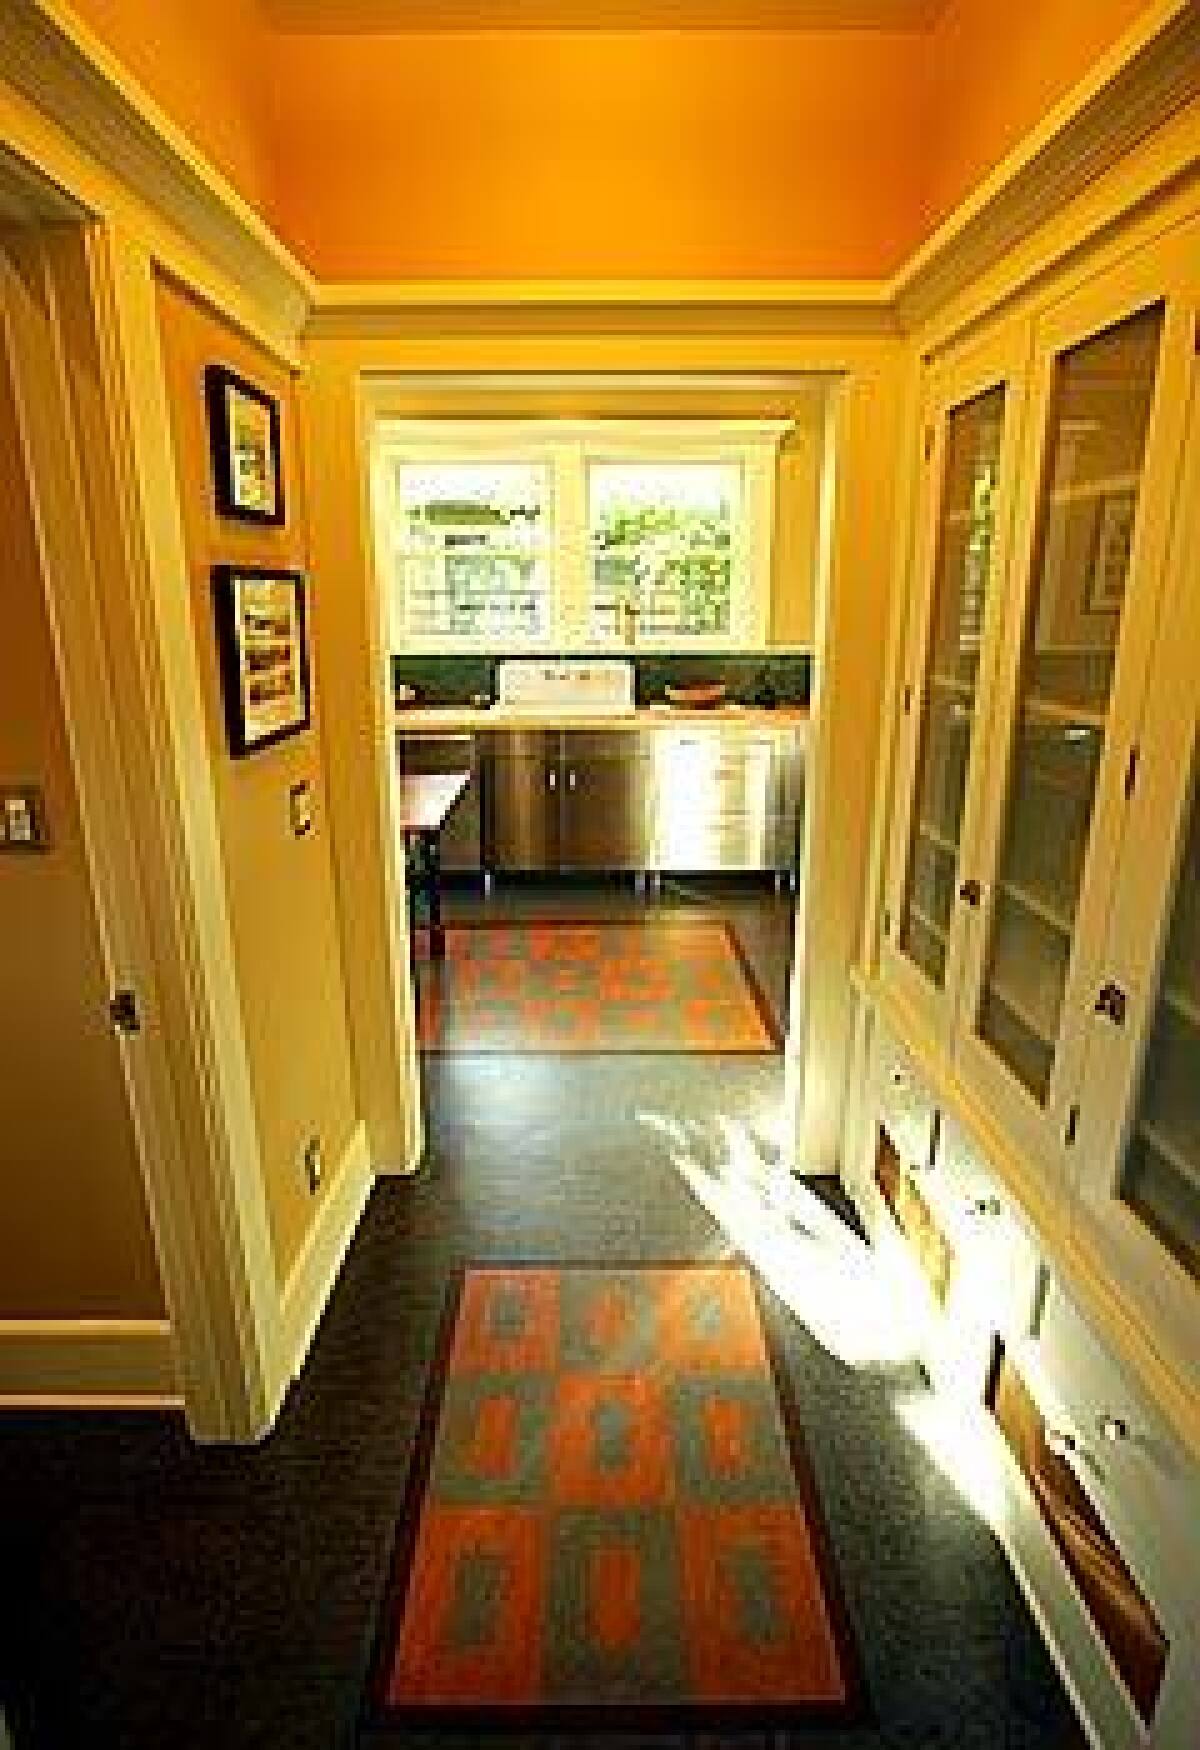 The hand-cut linoleum floor was devised by the kitchen designer and was based on a rug in the dining room.